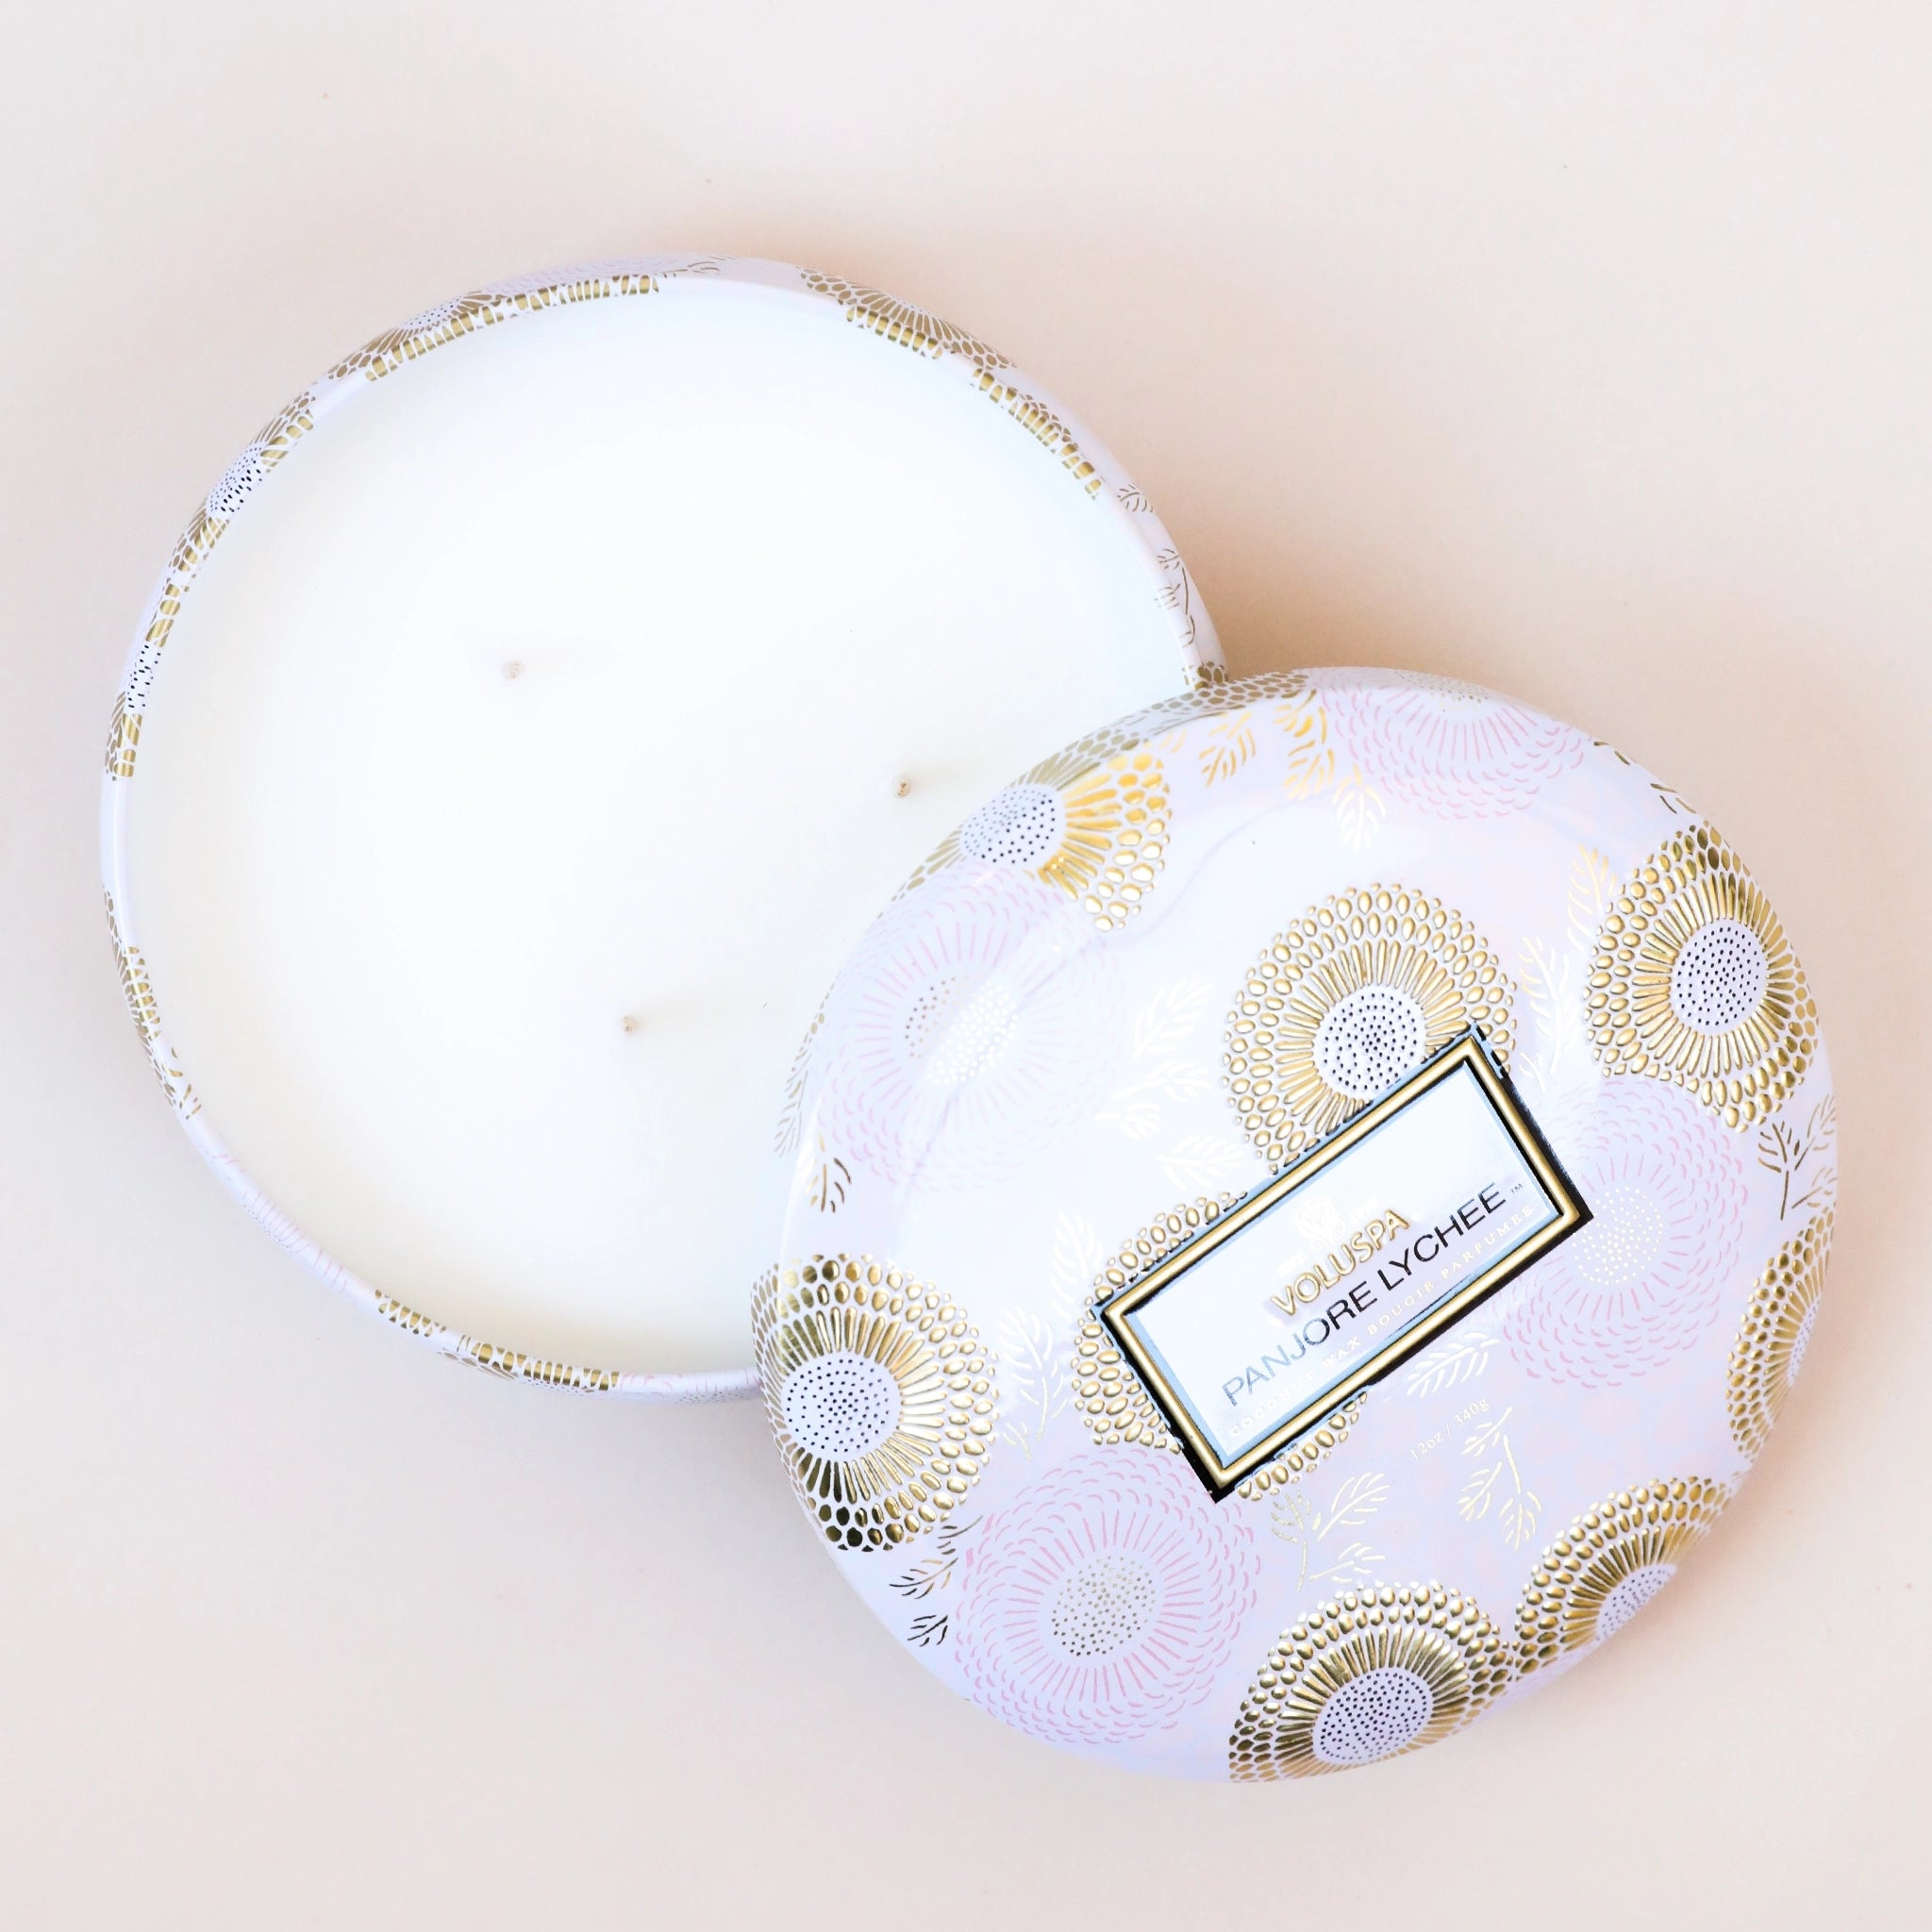 Birds eye view of a short, round tin. Inside the tin is a white candle with three white wicks. Leaning against the right side is a round tin lid. The lid has a light pink and gold floral pattern on it. In the middle is a white sticker with gold and black text inside.